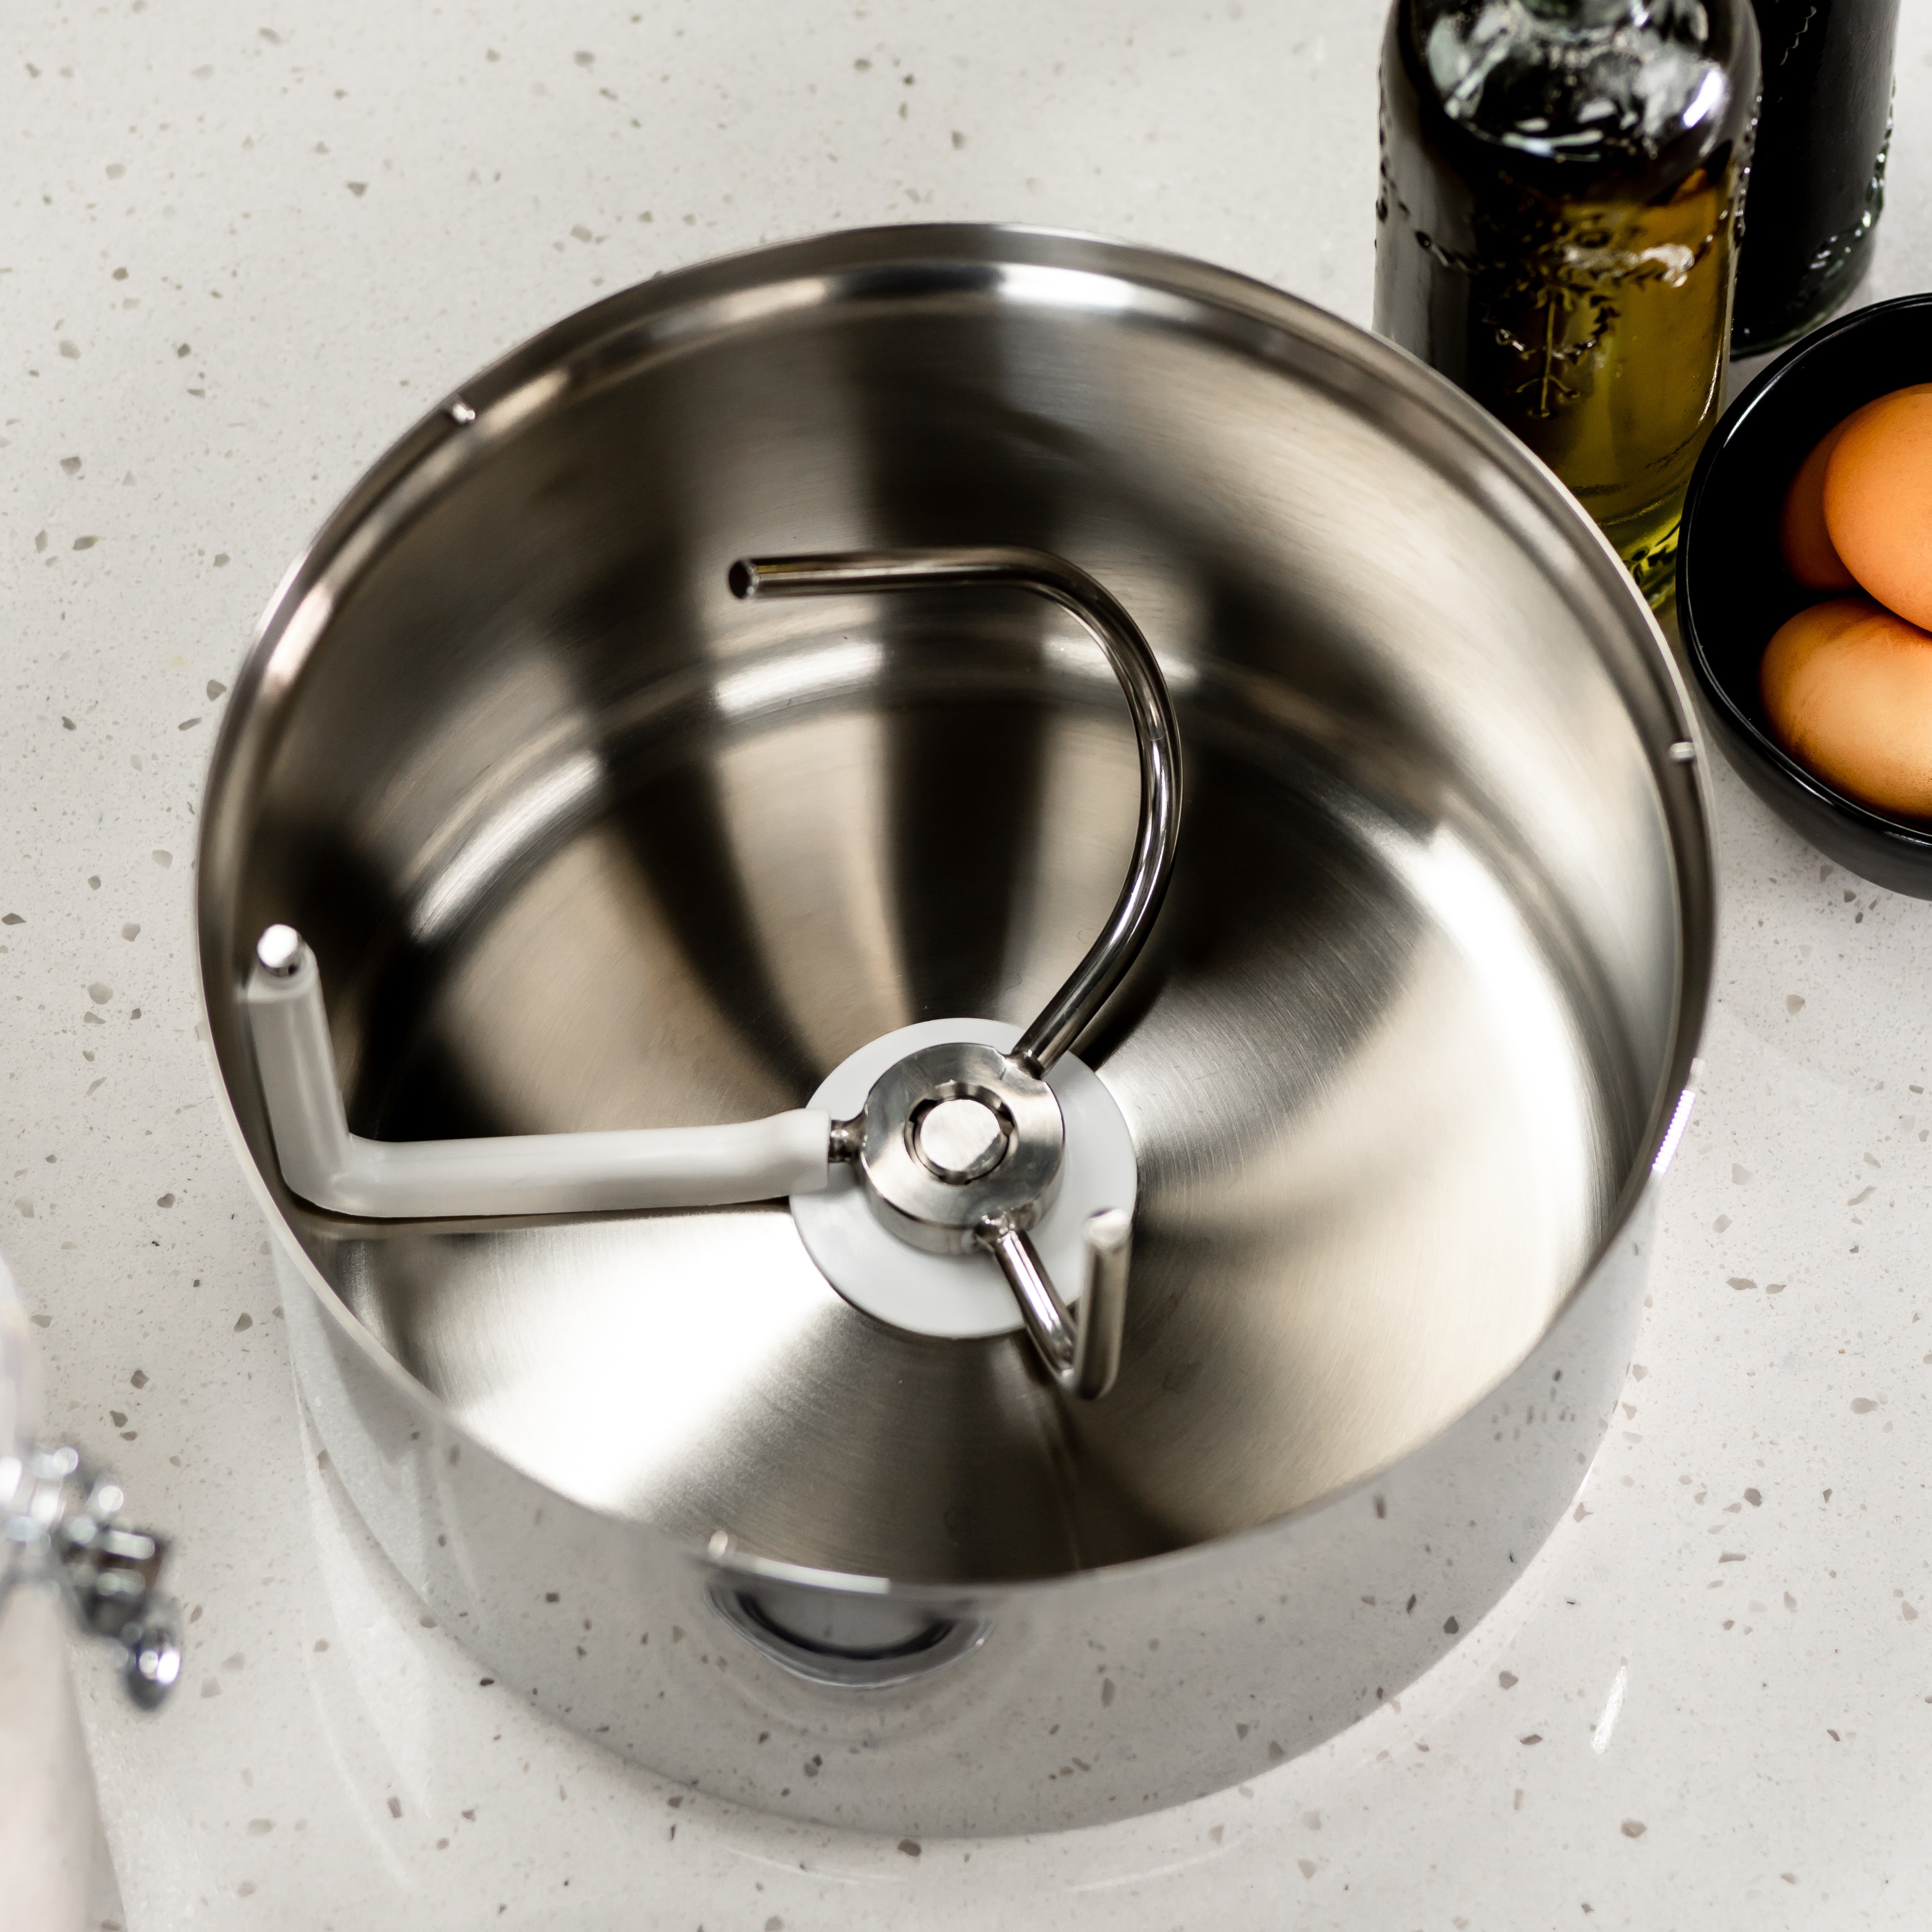 Bosch Stainless Steel Bowl with Bottom Drive MUZ6ER1  Great for Large Batches & Challah